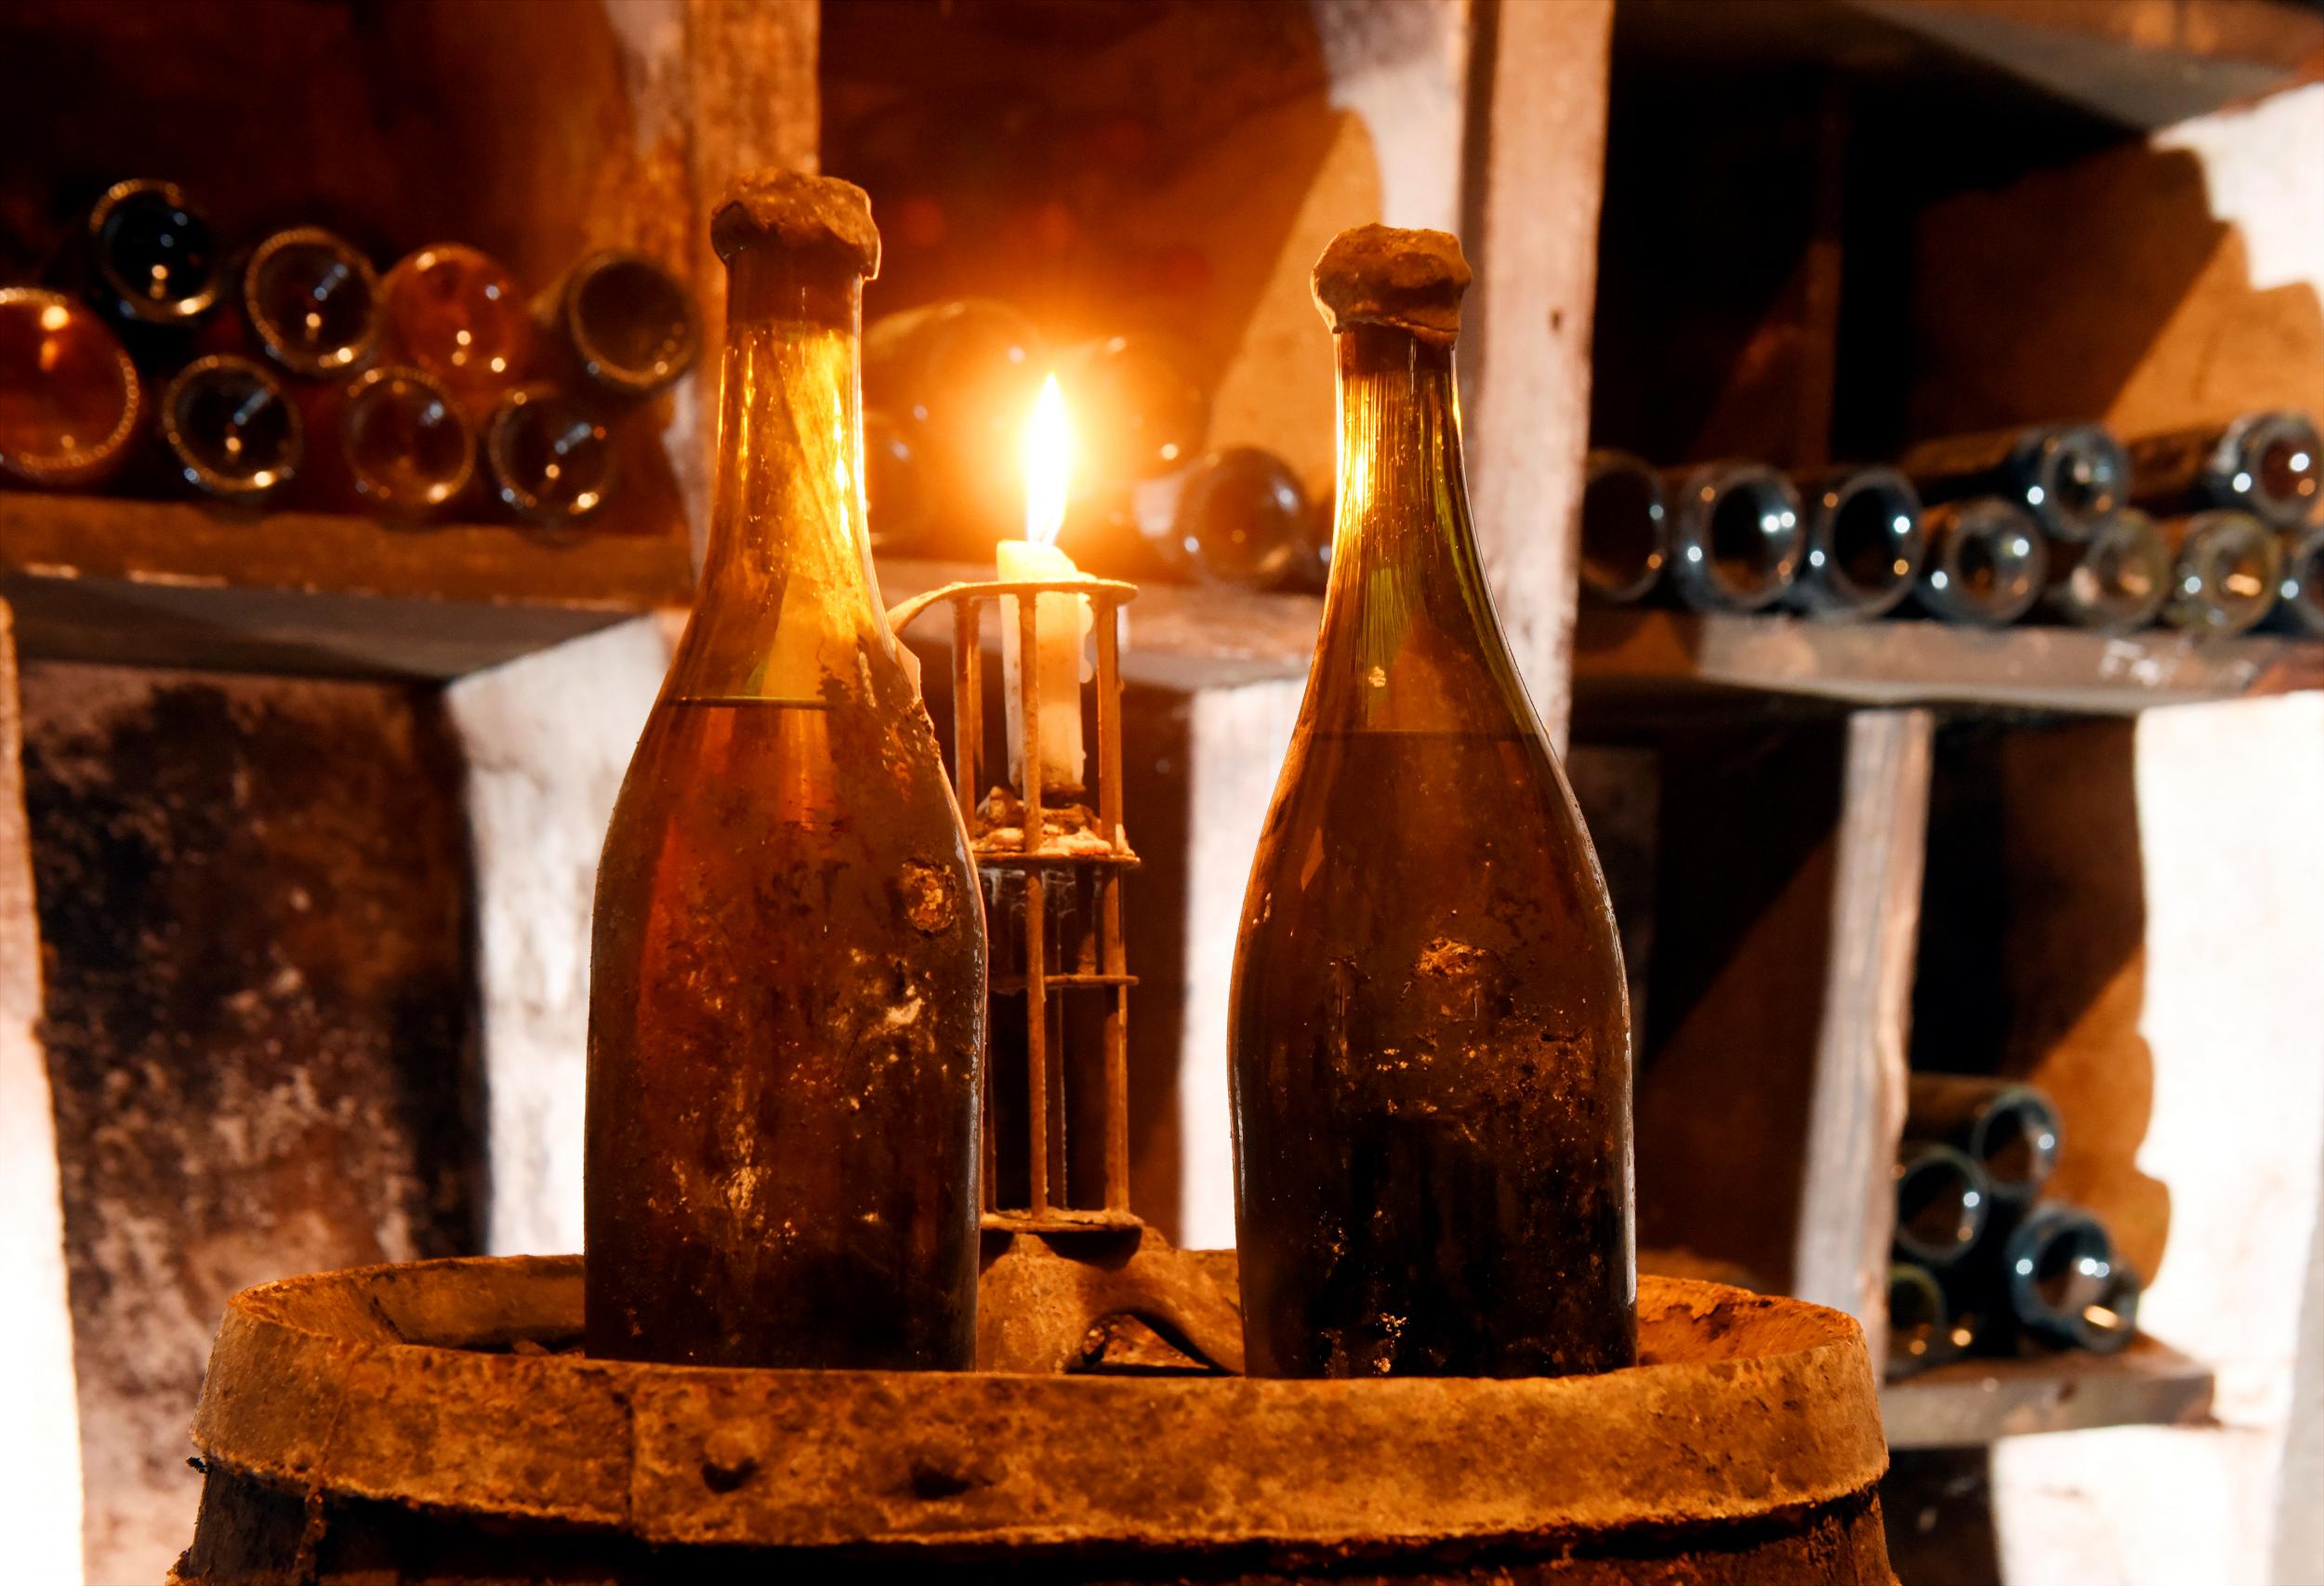 Two bottles, of three vintage bottles of vin jaune "yellow wine" from 1774